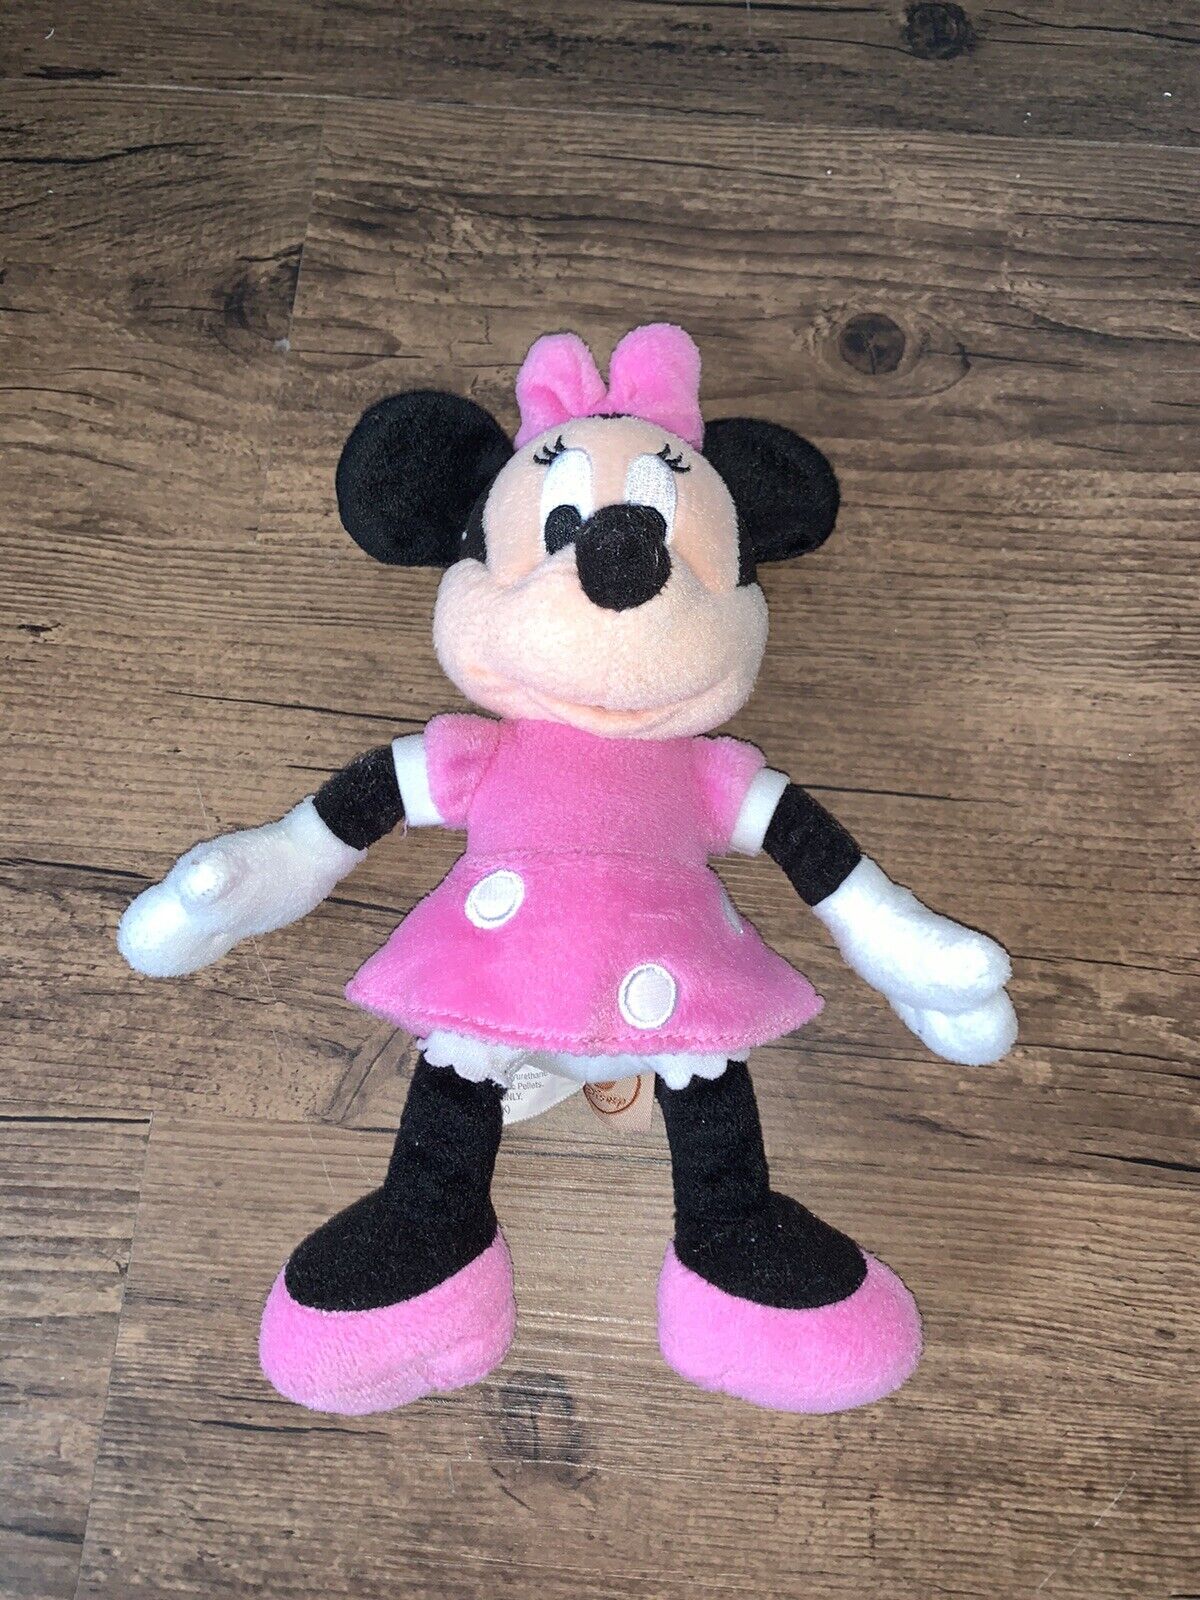 Original Disney Minnie Mouse Plush With Tags | In Good Condtion